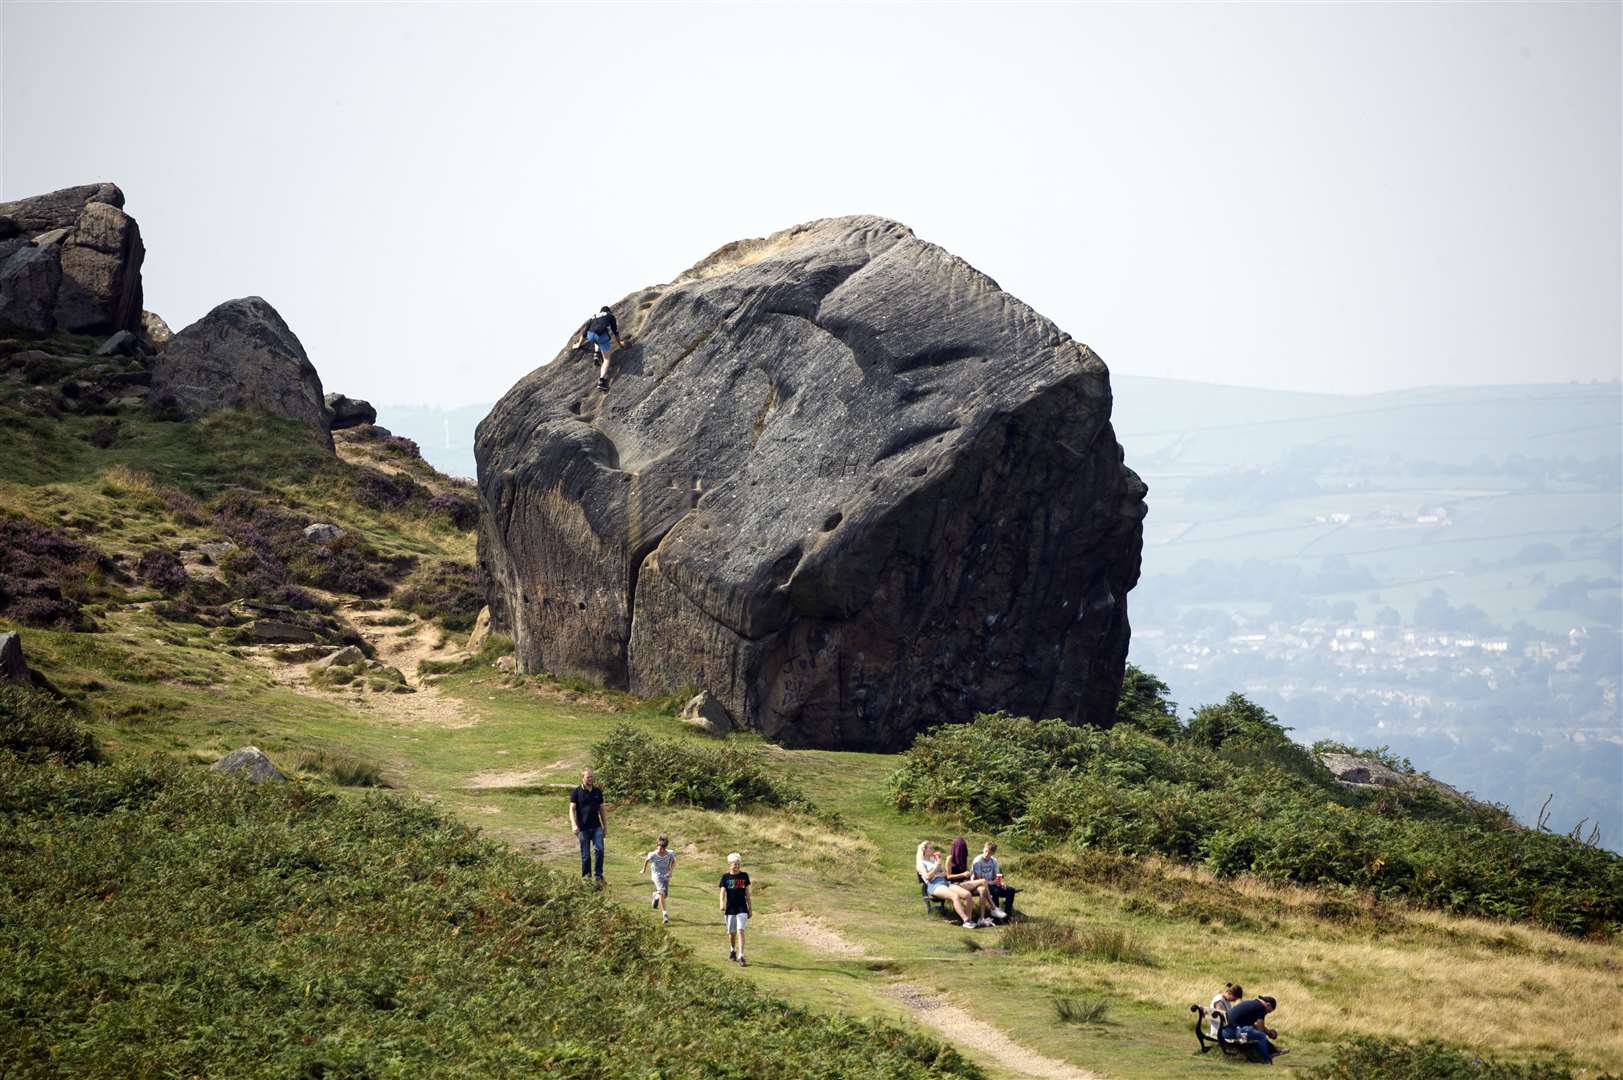 People walk near a rock formation known locally as the Cow and Calf on Ilkley Moor in Yorkshire (PA)